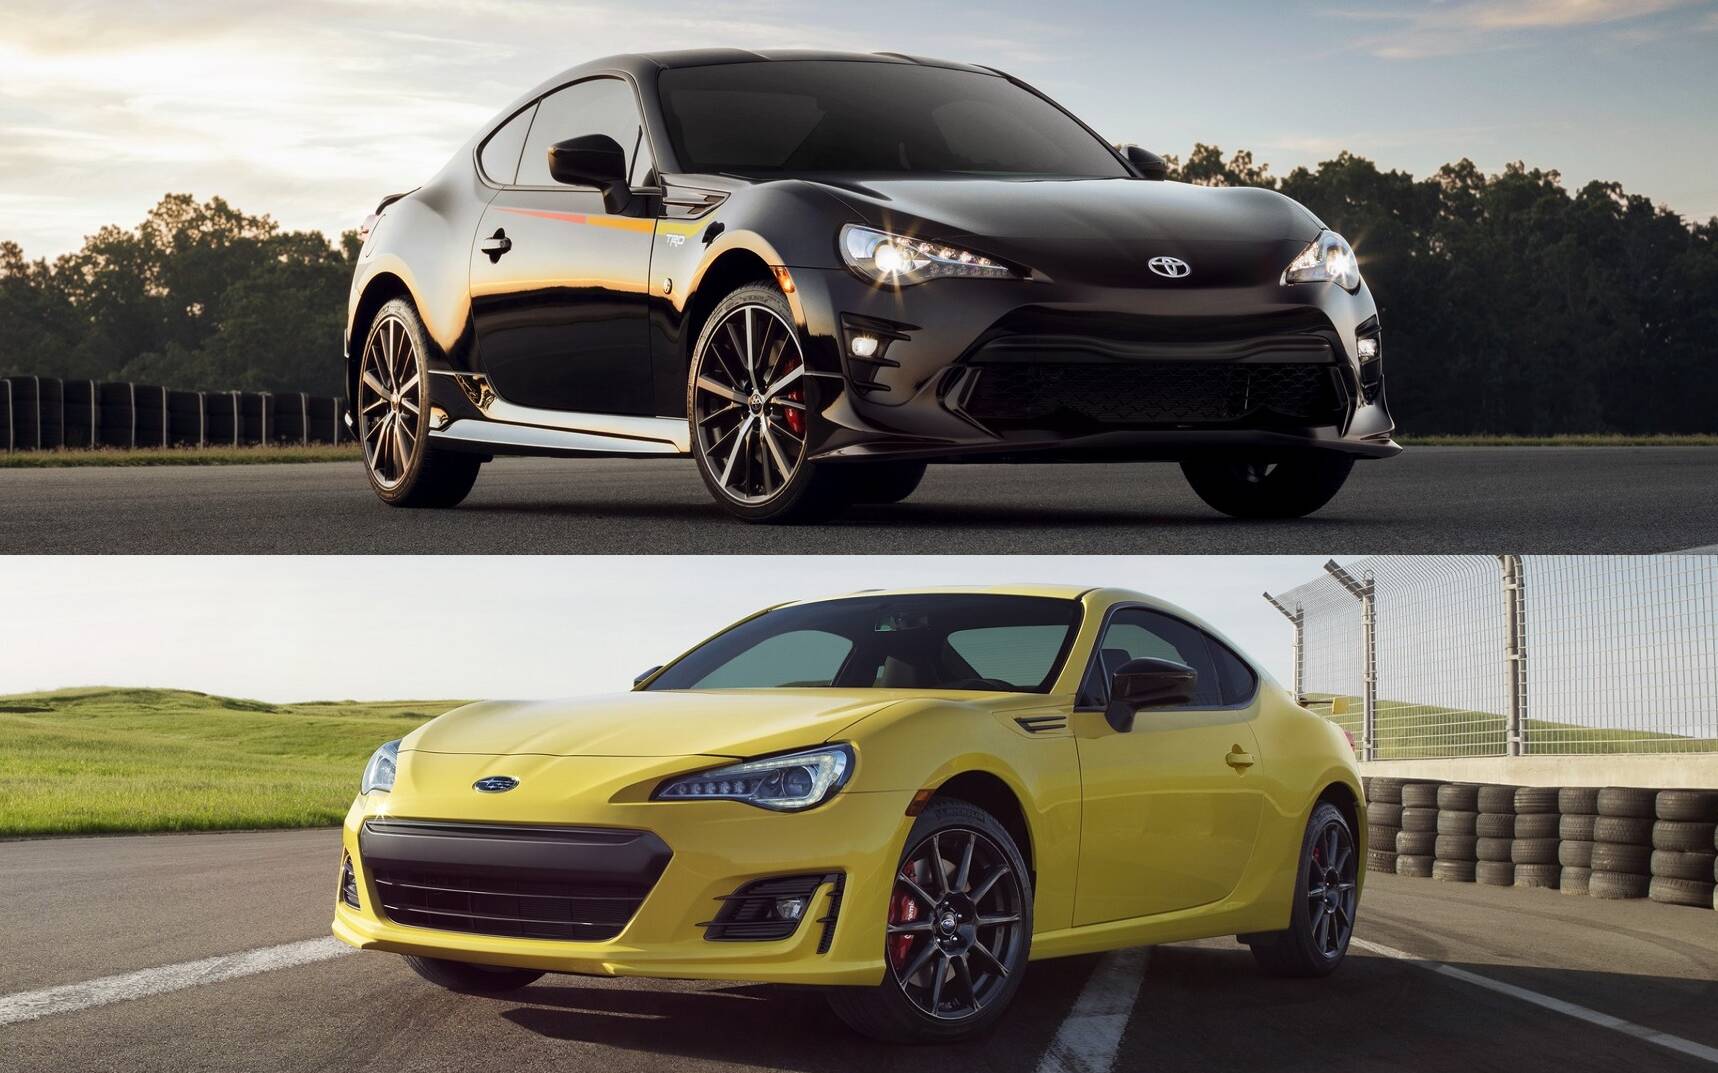 Toyota 86 and Subaru BRZ: What's the Difference? - The Car Guide